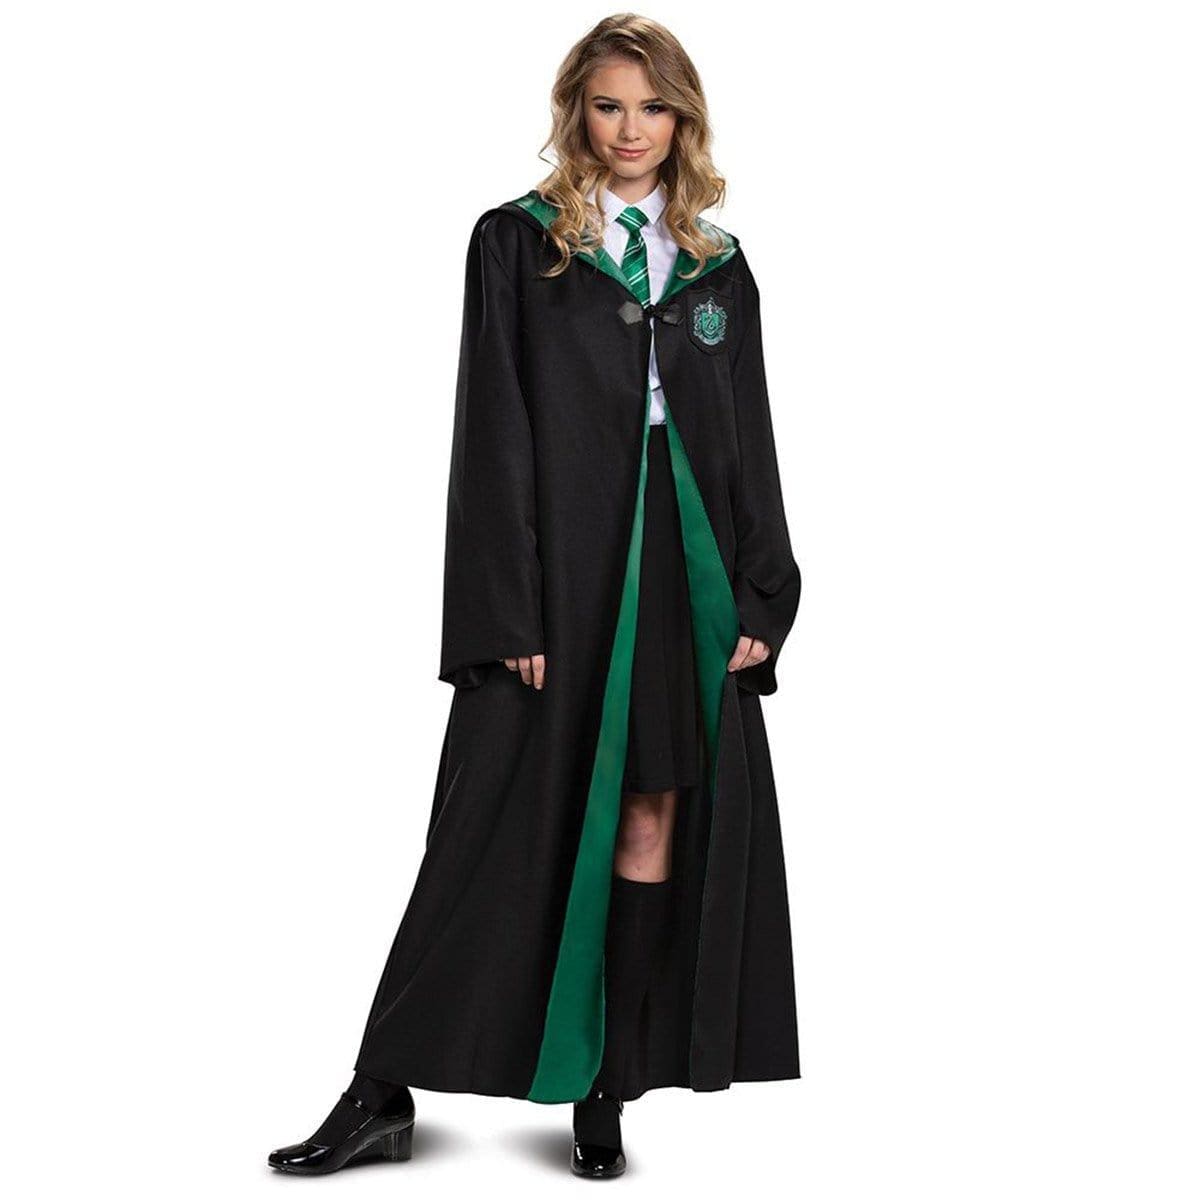 Harry Potter Costume for Men, Deluxe Wizarding World Adult Size Dress Up  Character Outfit